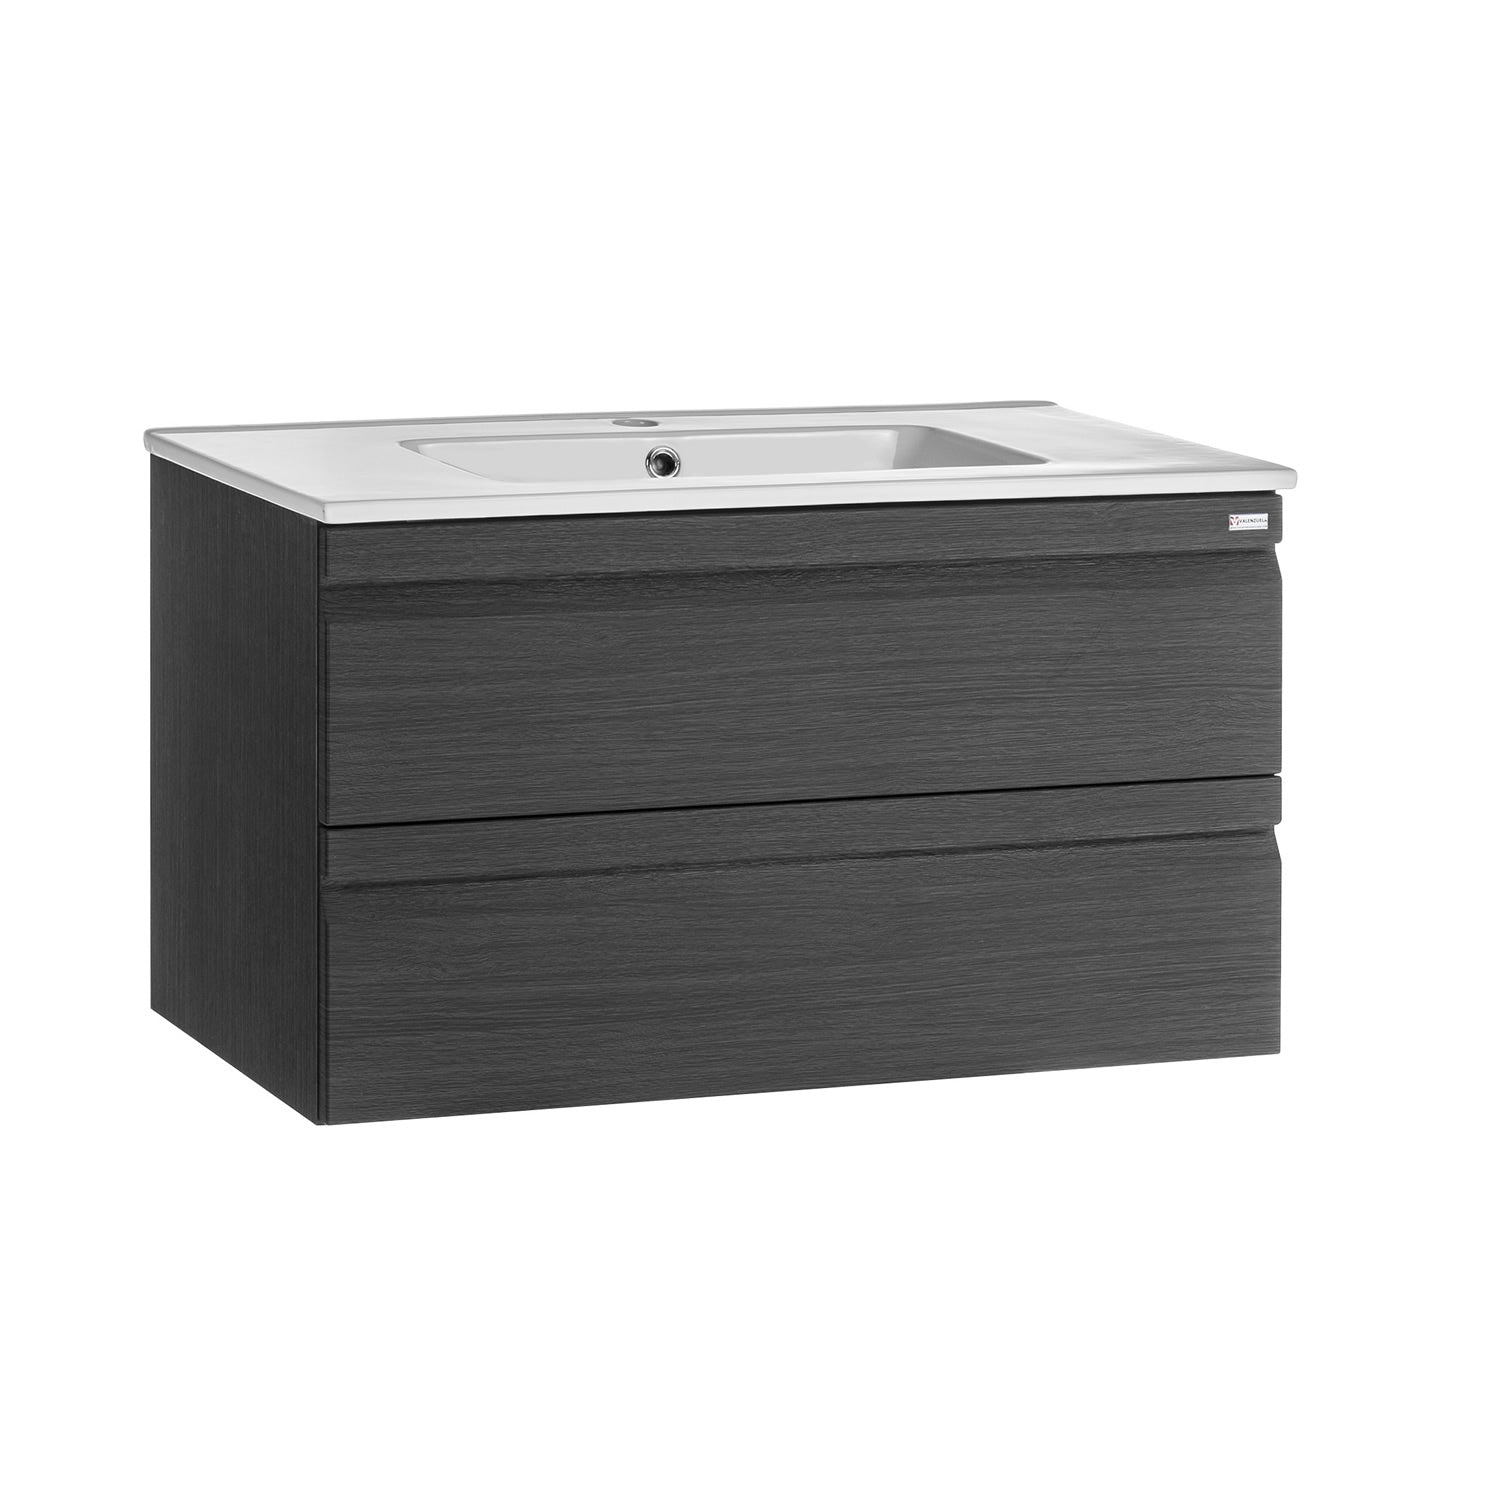 32" Single Vanity, Wall Mount, 2 Drawers with Soft Close, Grey, Serie Solco by VALENZUELA